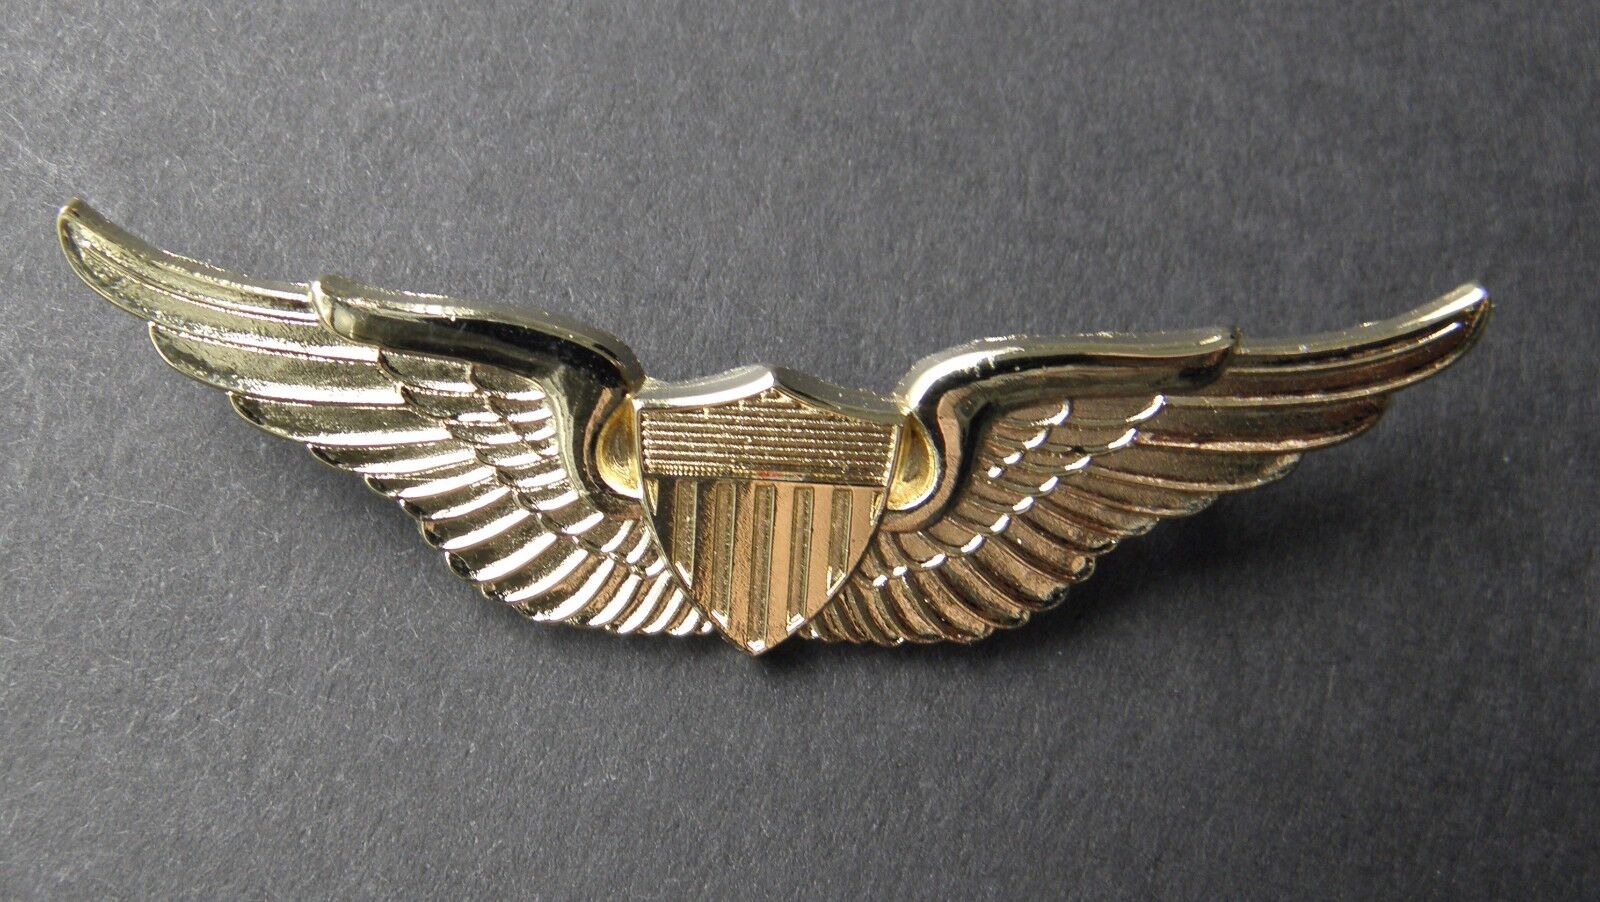 US ARMY AVIATION BASIC GOLD COLORED AVIATOR WINGS LAPEL PIN BADGE 2.6 INCHES